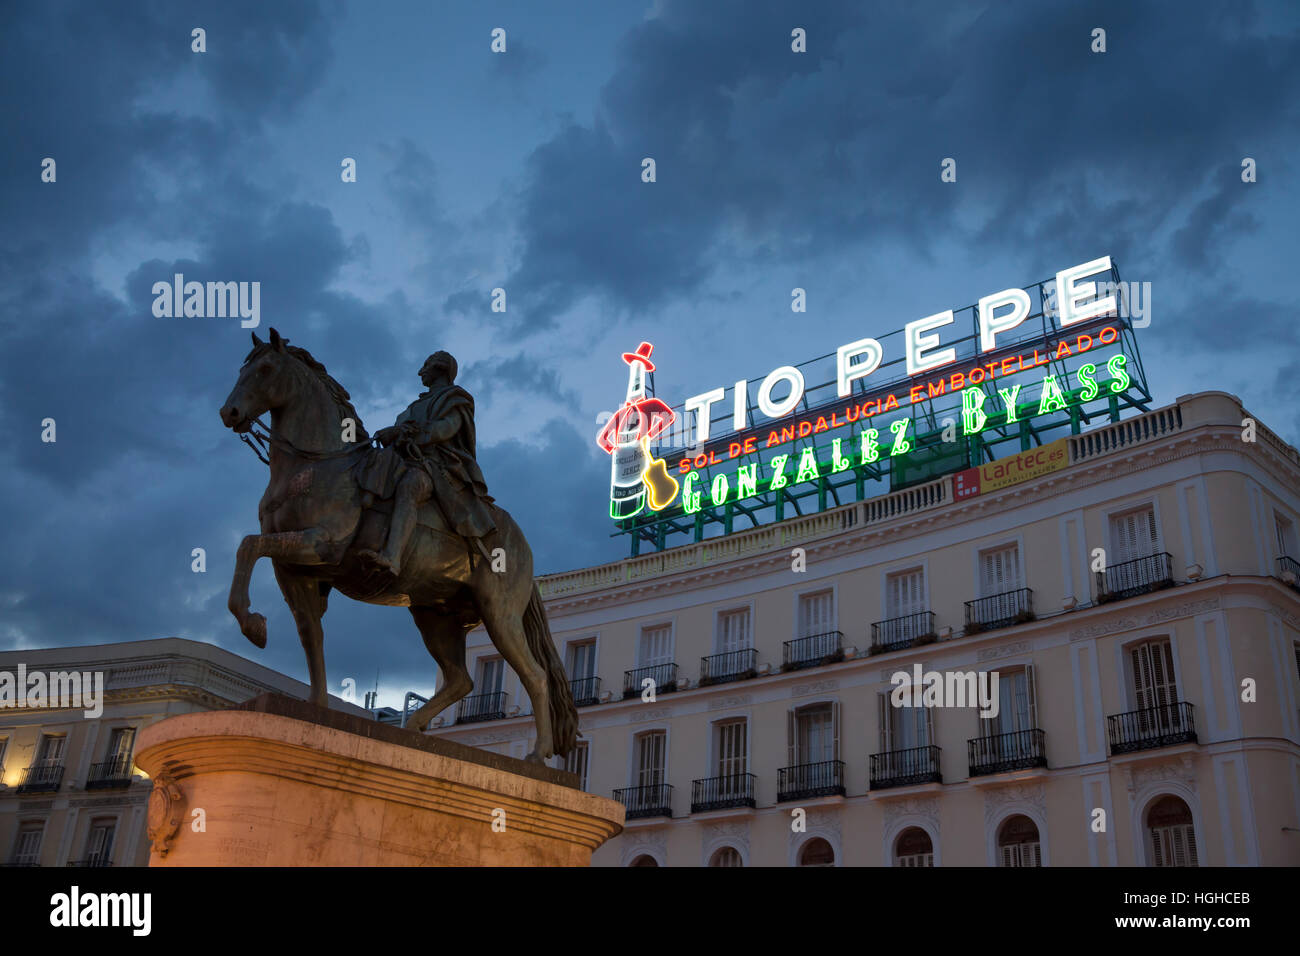 Madrid, Spain: Equestrian statue of Charles III of Spain with the landmark Tío Pepe sign in the Puerta del Sol. Stock Photo